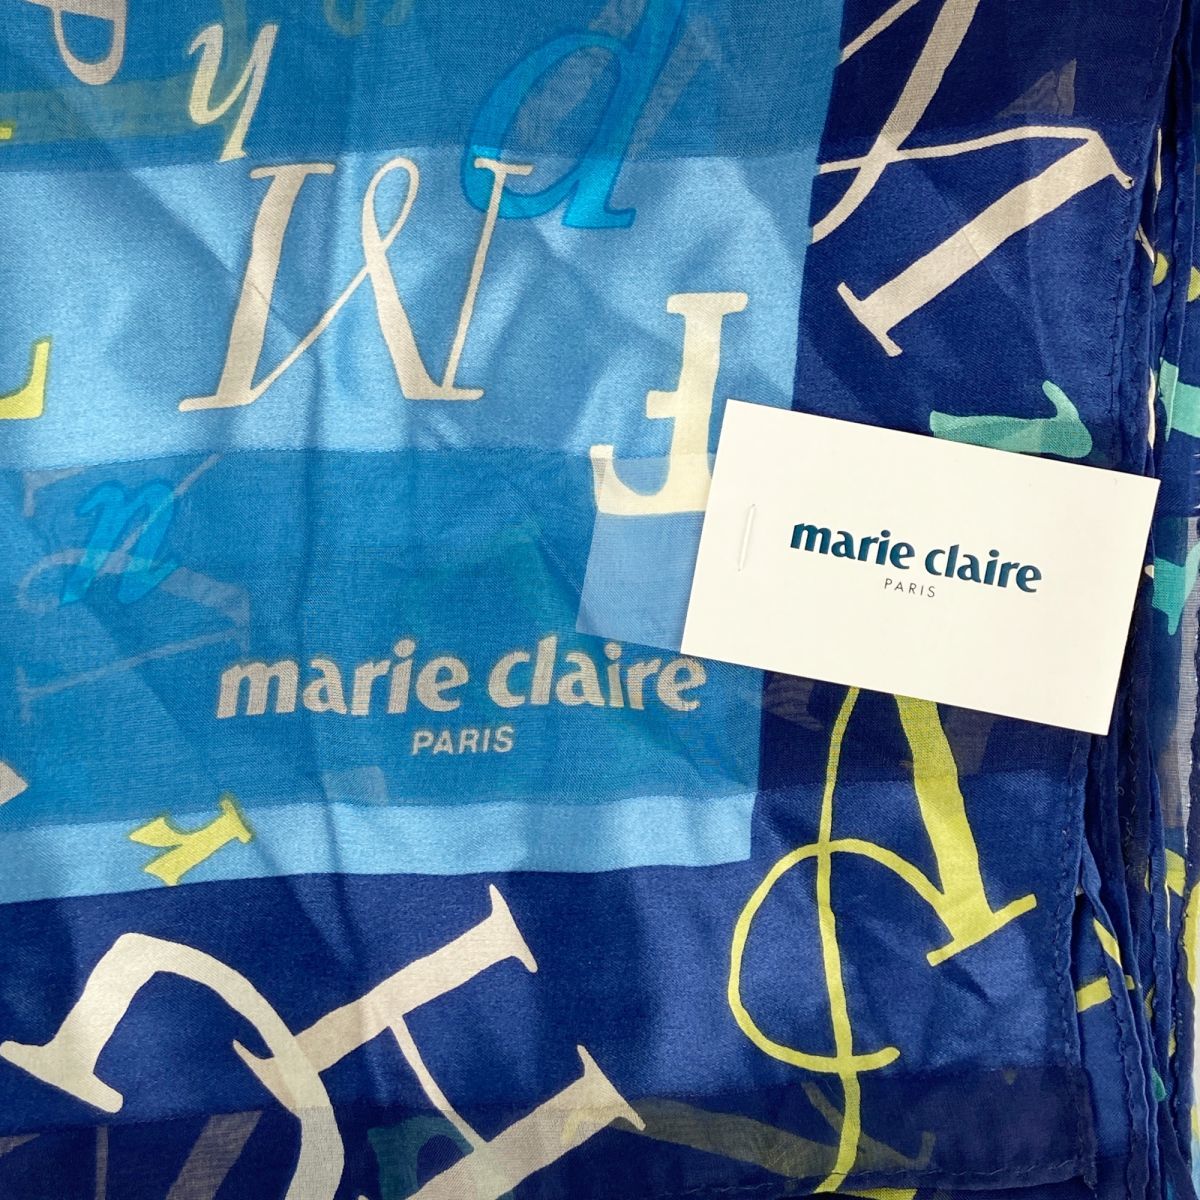  new goods unused Marie Claire Mali * clair scarf Logo total pattern light blue blue blue @AB79